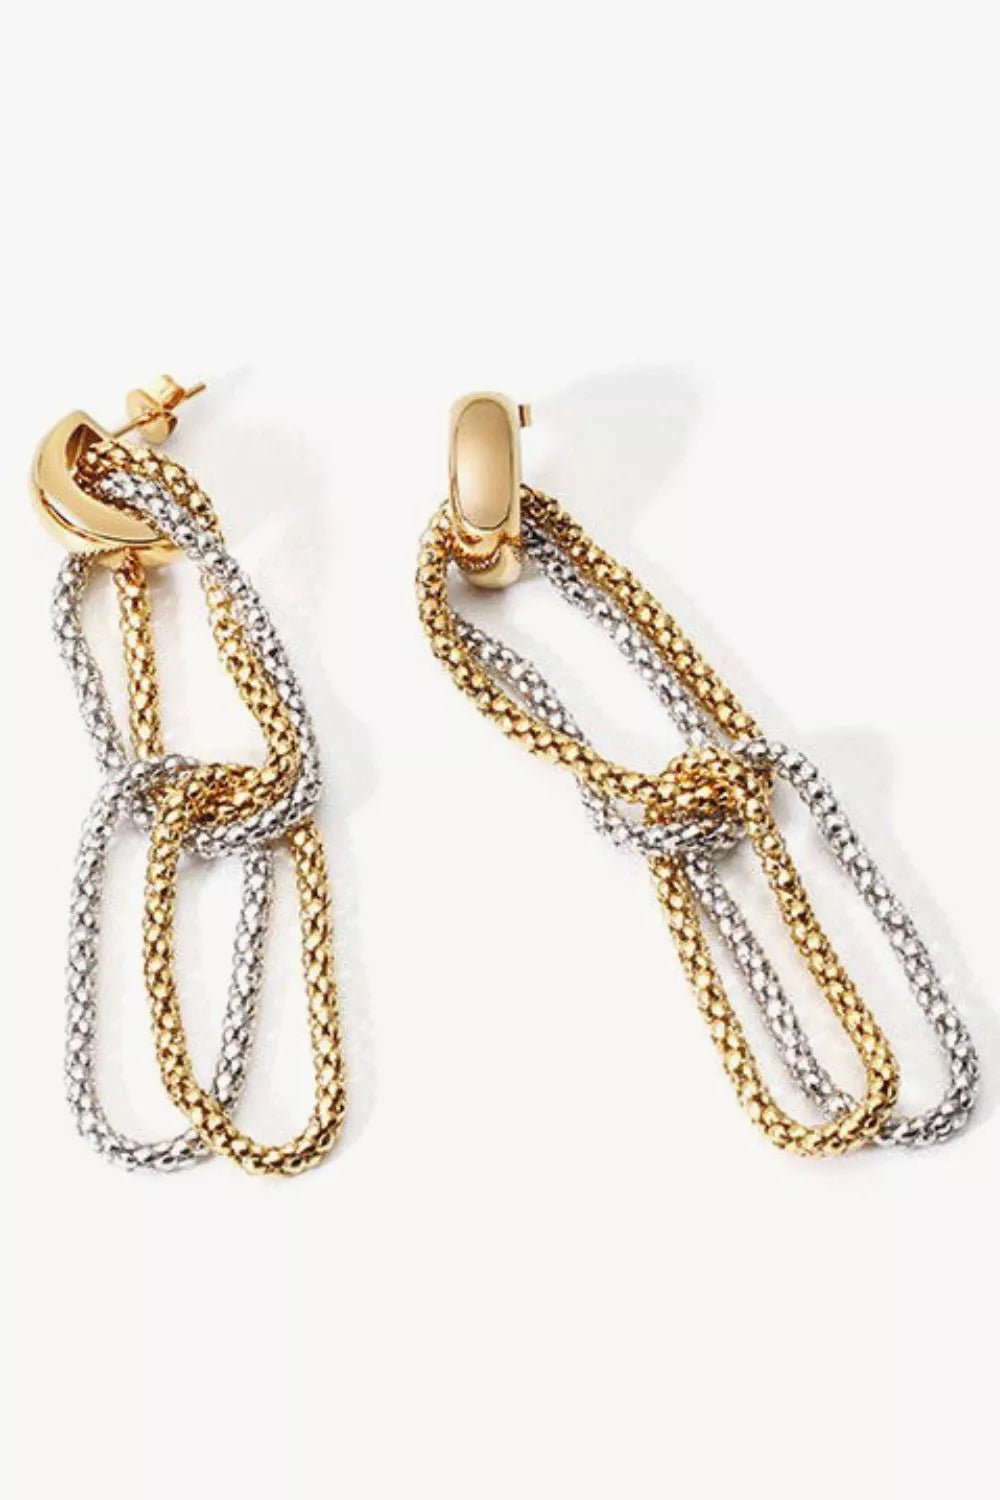 Gold-Plated D-Shaped Drop Earrings - London's Closet Boutique